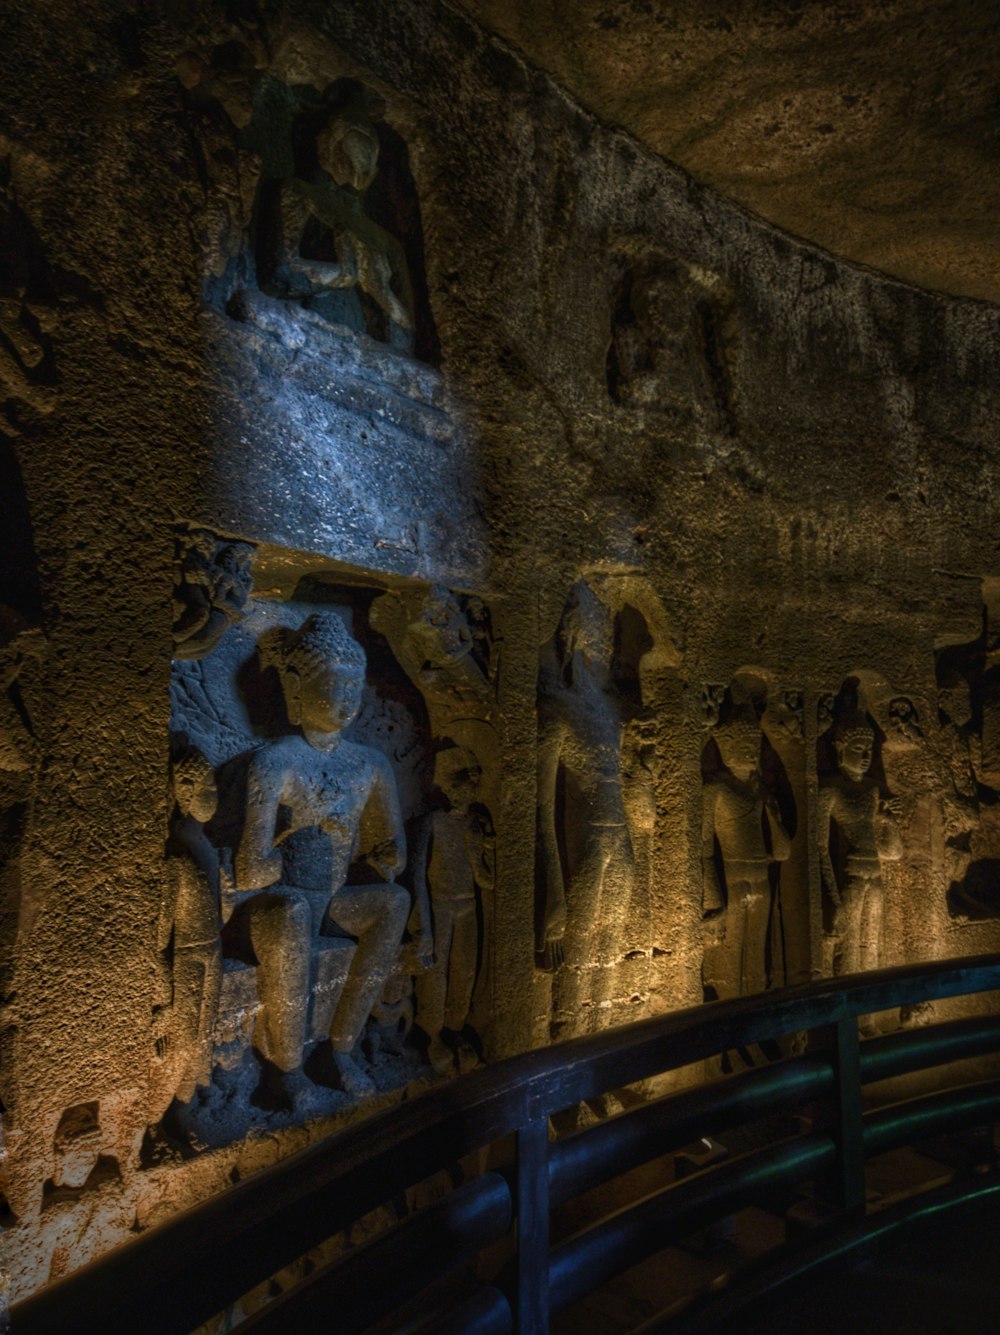 a stone wall with statues on it at night